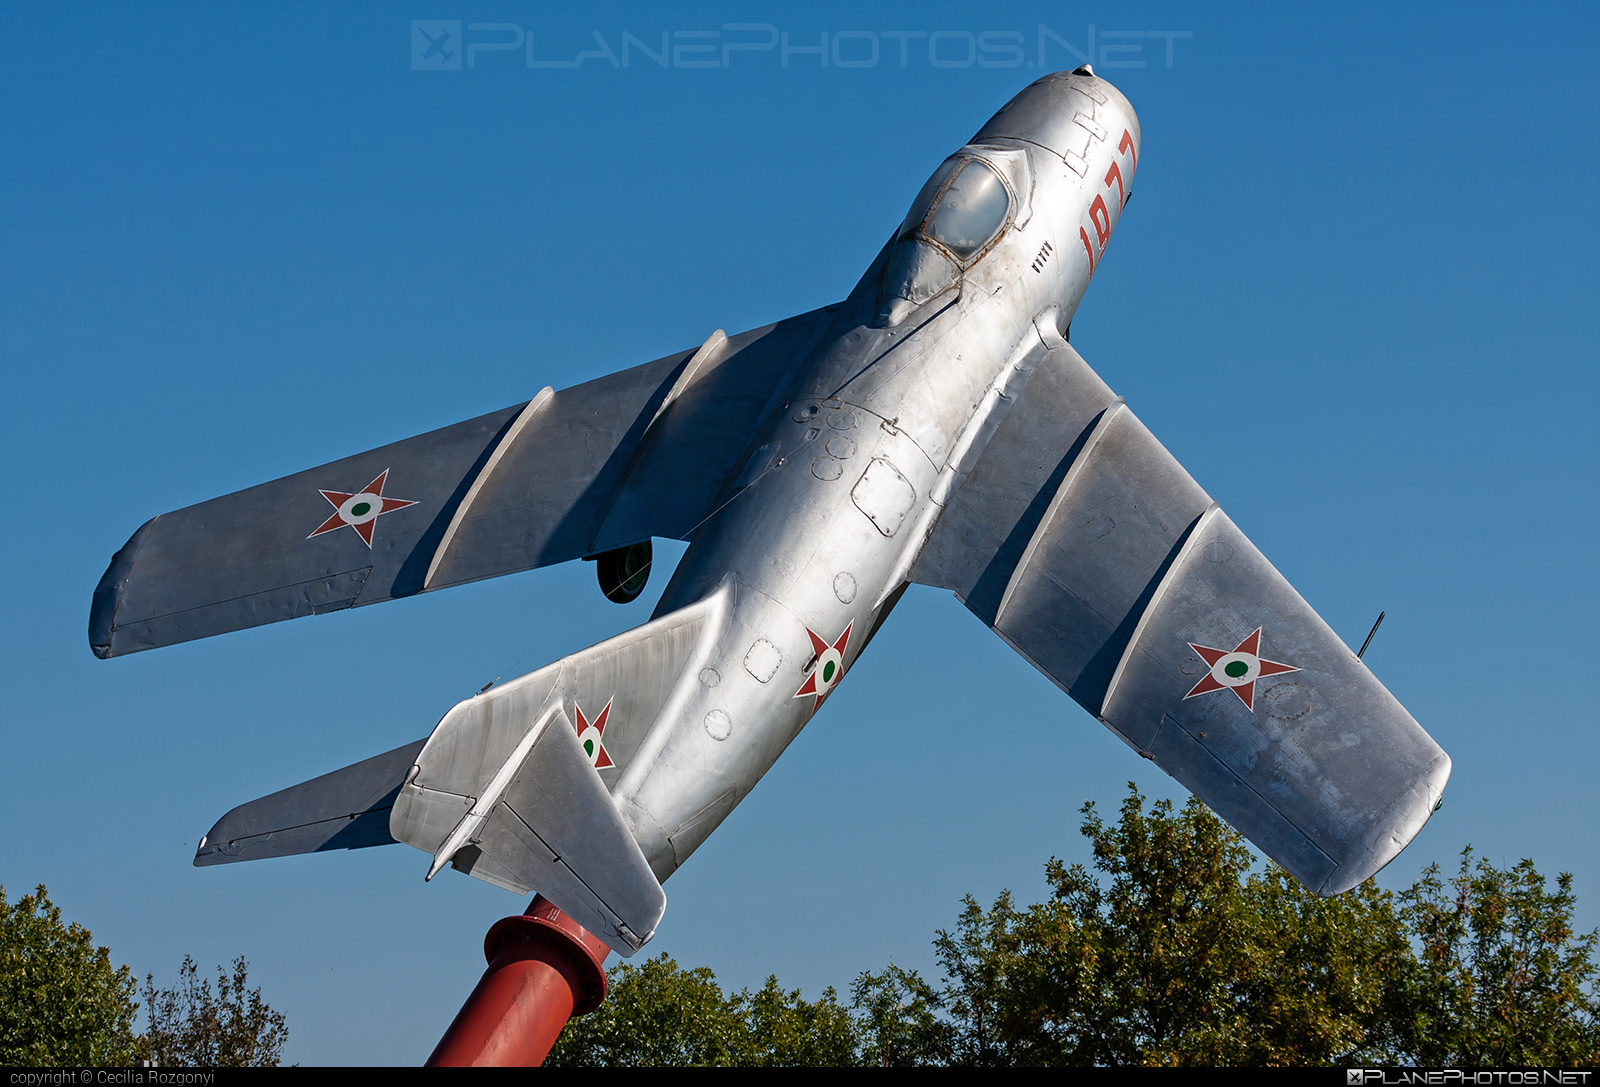 Mikoyan-Gurevich MiG-15bis - 684 operated by Magyar Néphadsereg (Hungarian People's Army) #hungarianpeoplesarmy #magyarnephadsereg #mig #mig15 #mig15bis #mikoyangurevich